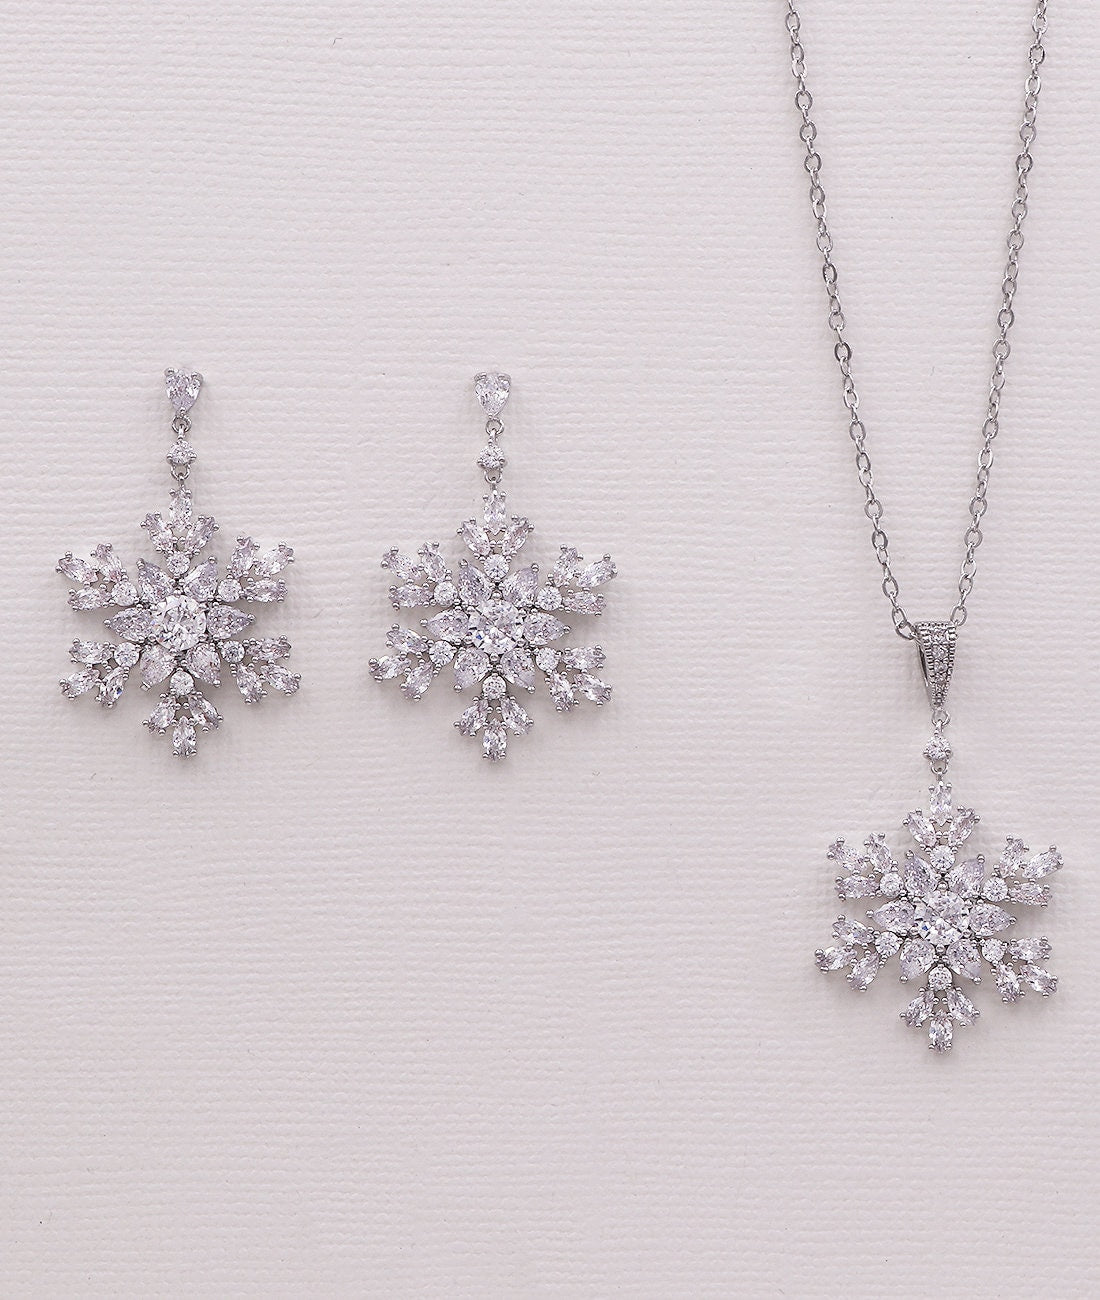 Snowflake Earrings and Necklace Jewelry Set